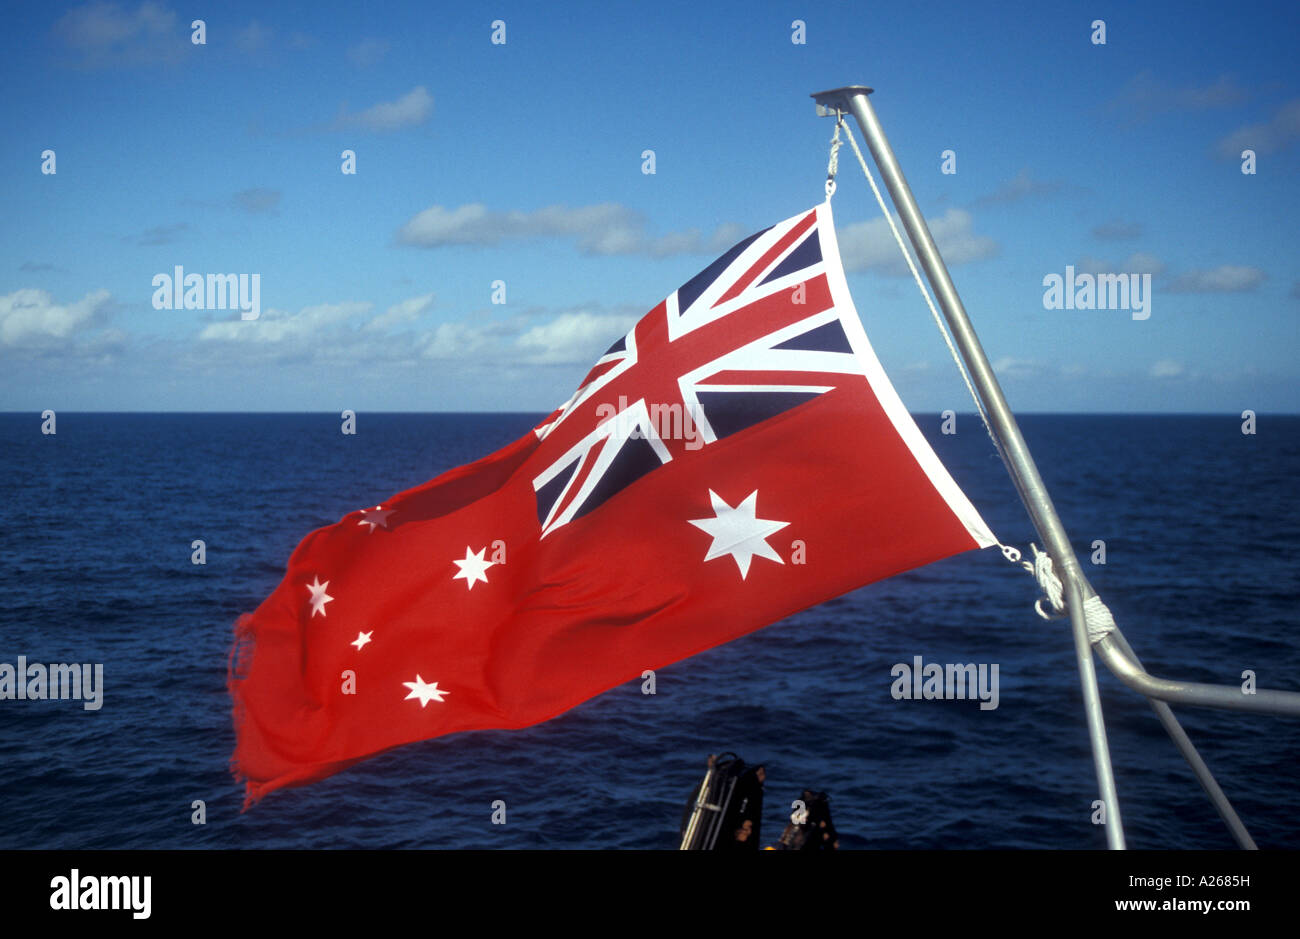 Australian red ensign flag on Great Barrier Reef catamaran Quicksilver VIII taking tourists to base at Agincourt Reef. Stock Photo